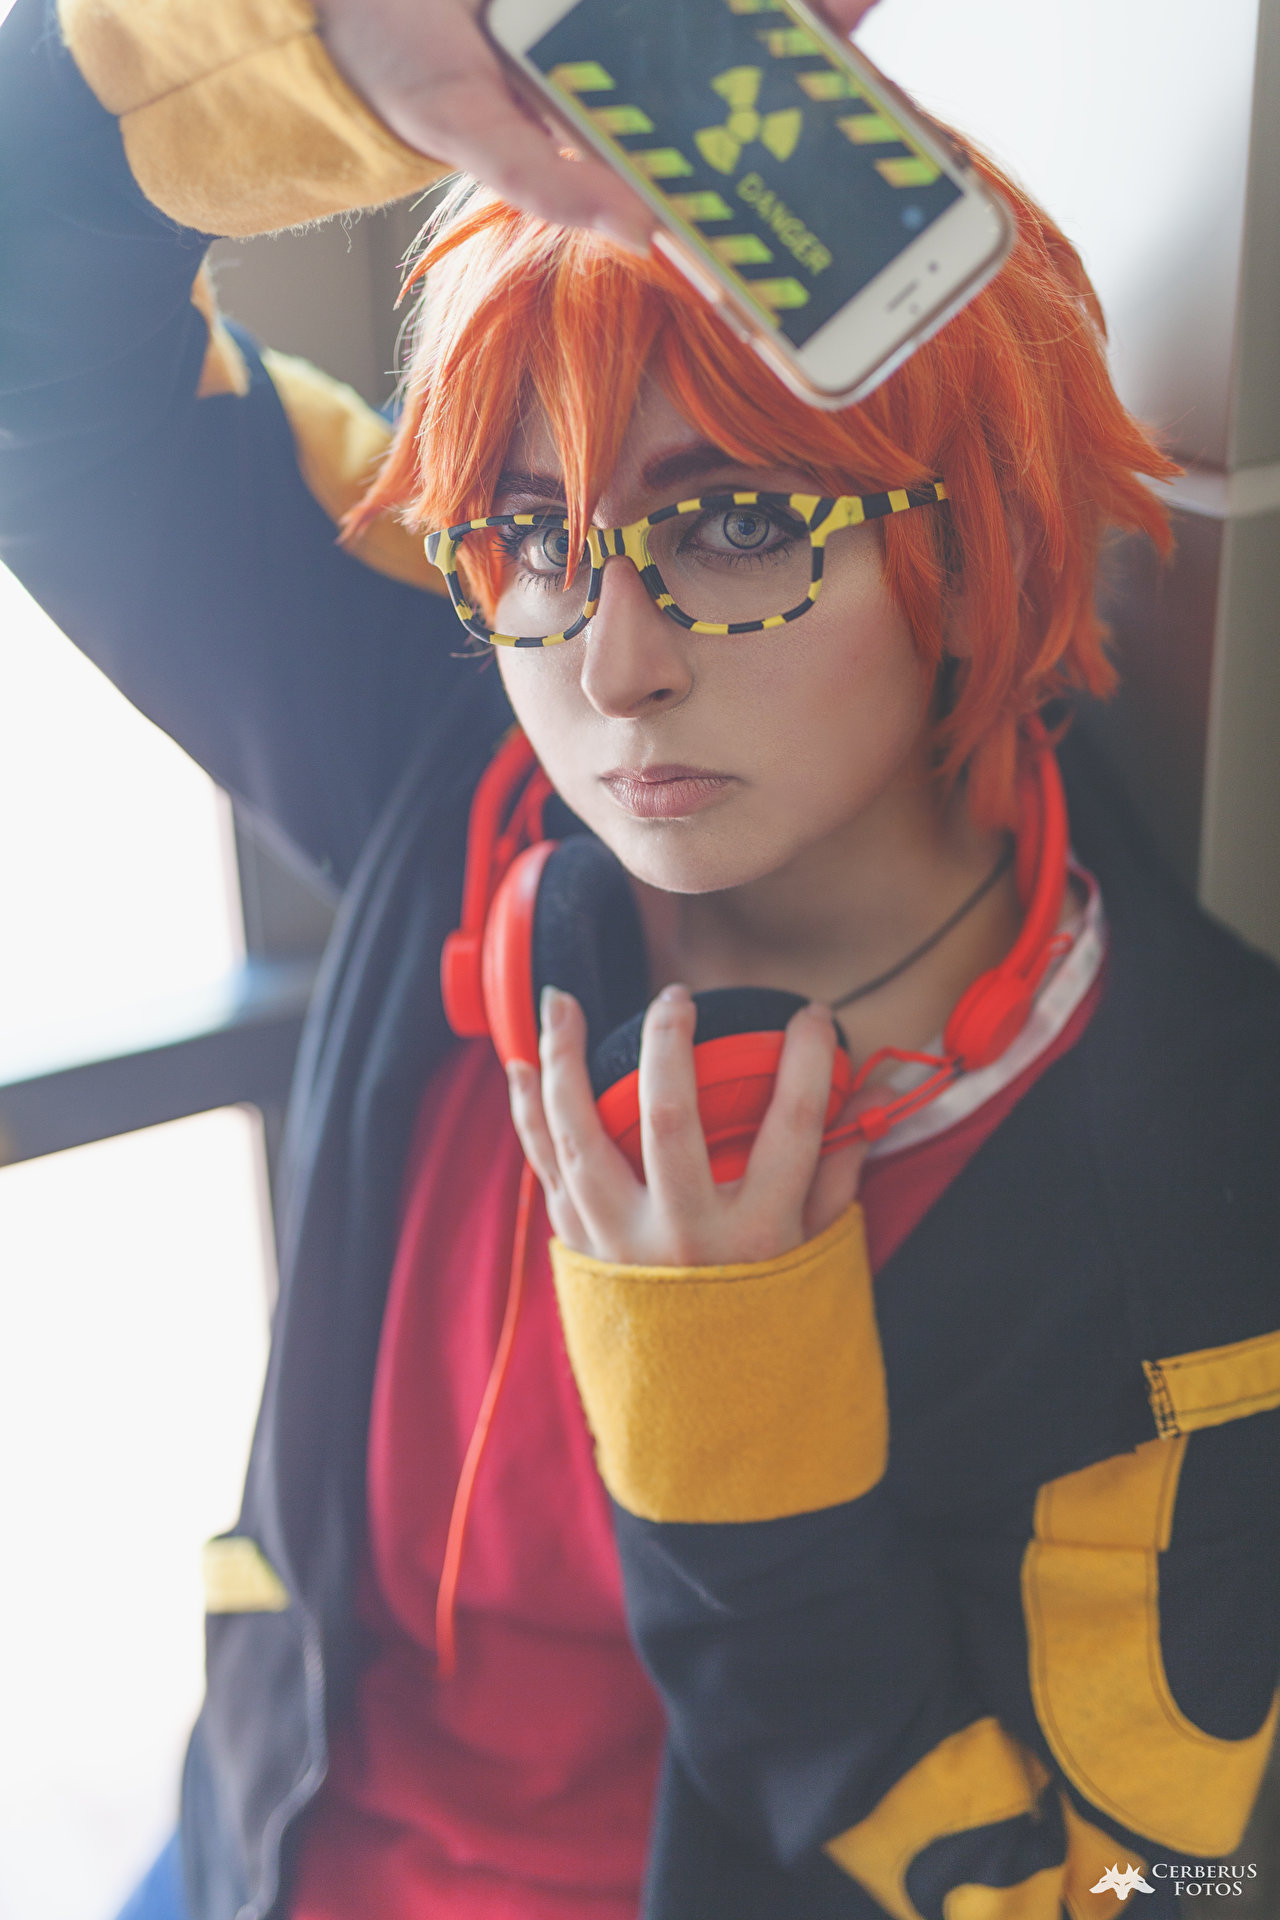 Cospix.net photo featuring Lunar Prince Cosplay